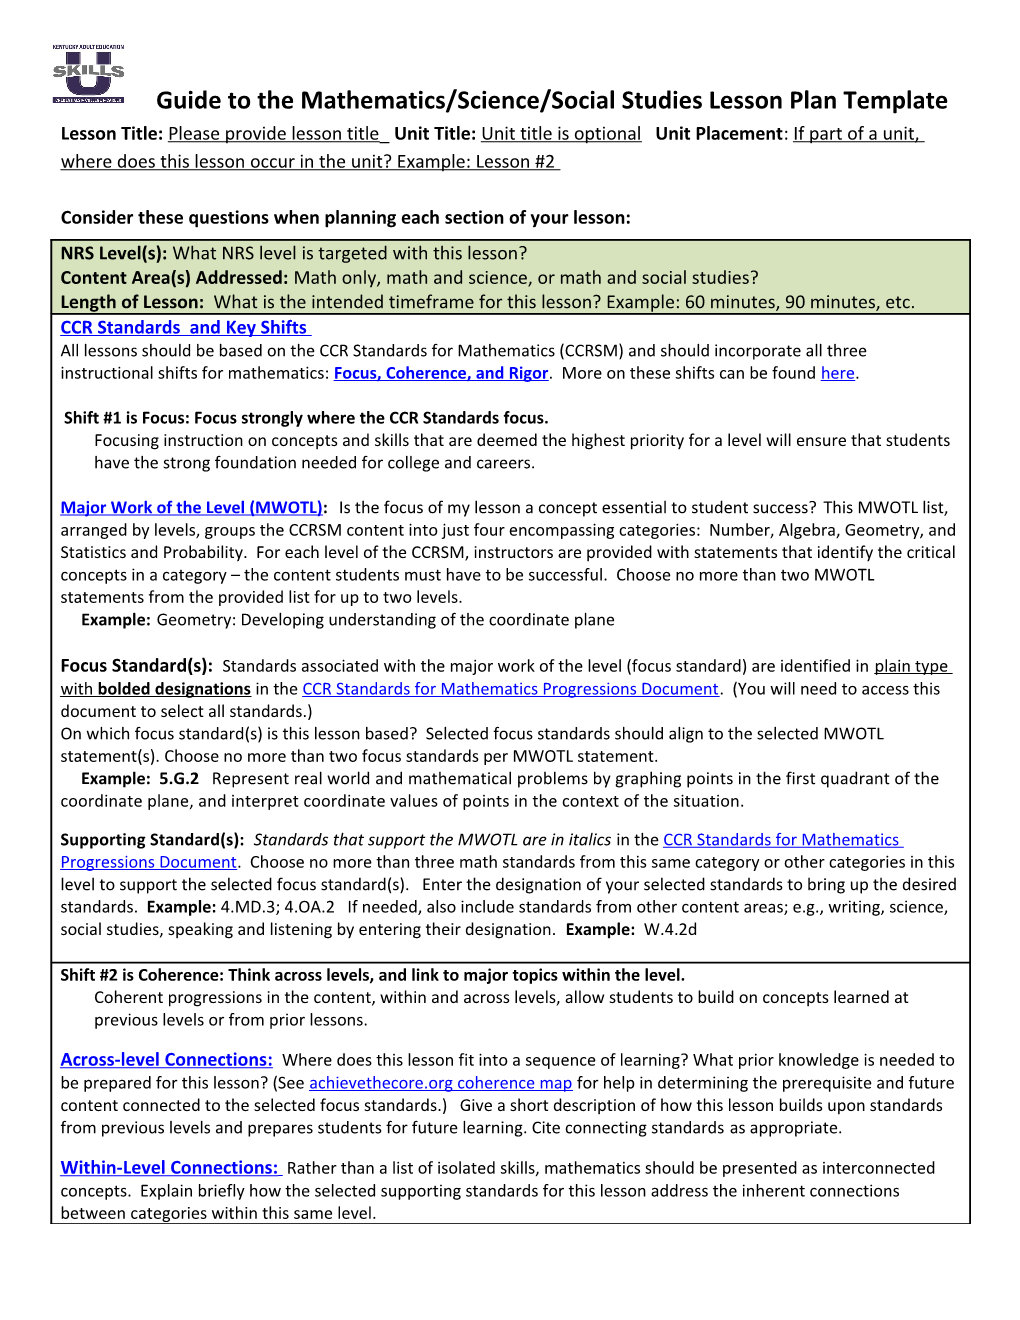 Guide to the Mathematics/Science/Social Studies Lesson Plan Template